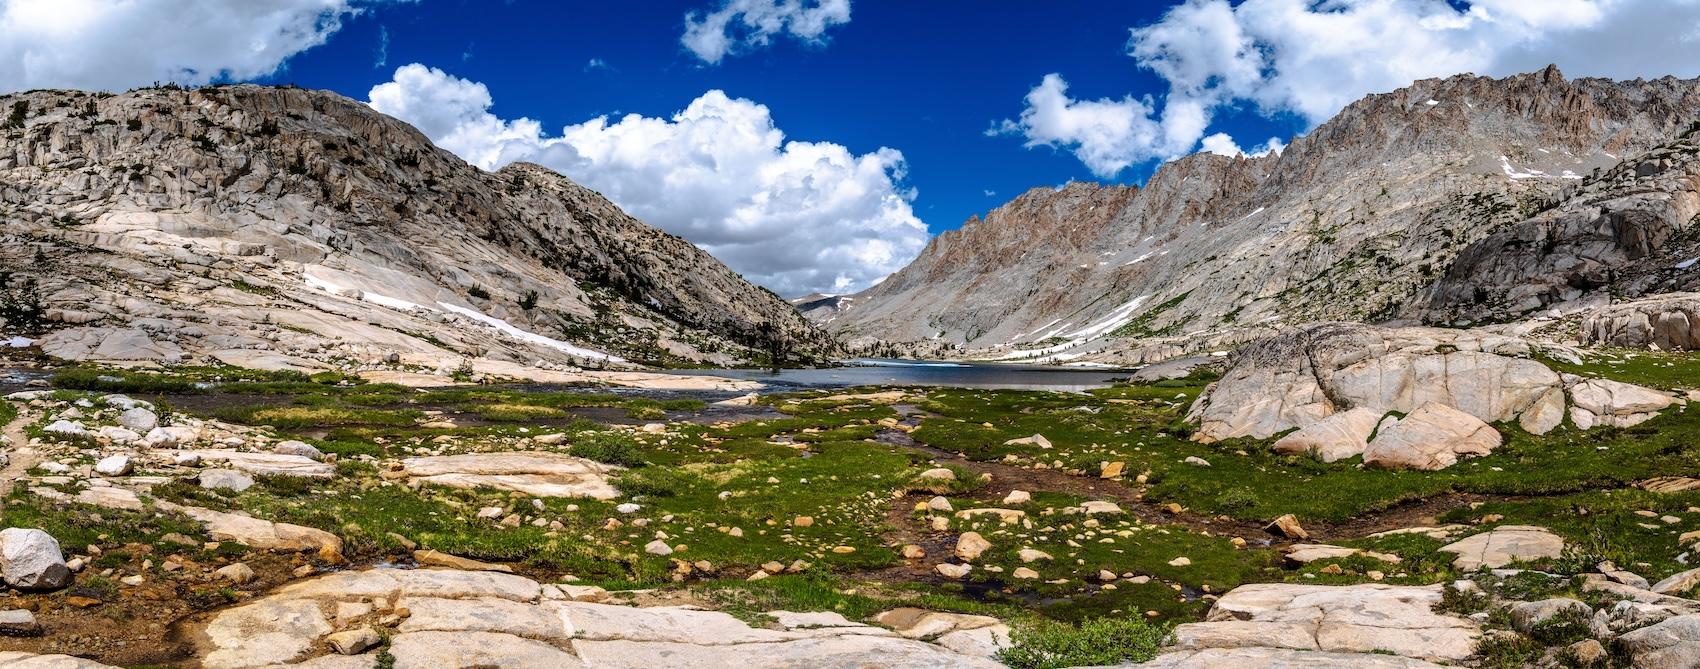 Trailside view of Evolution Lake in Kings Canyon National Park